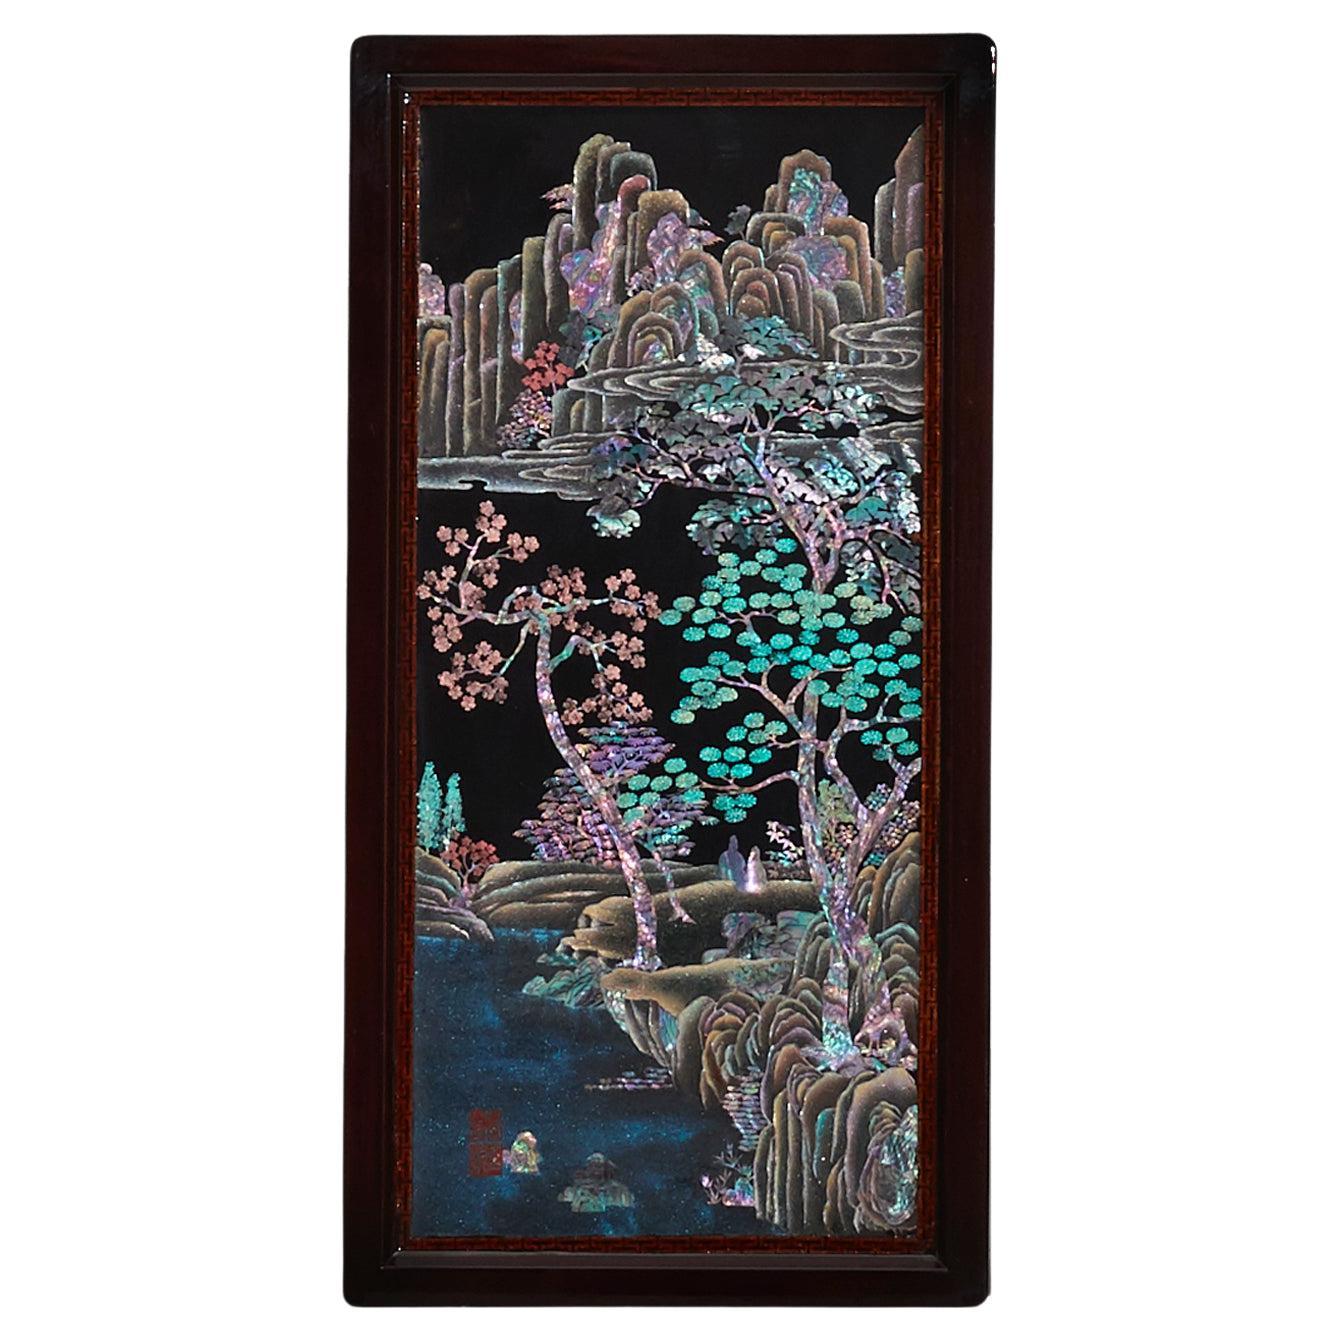 Wall Decor Handcrafted Landscape Painting on Wood Panel by Arijian